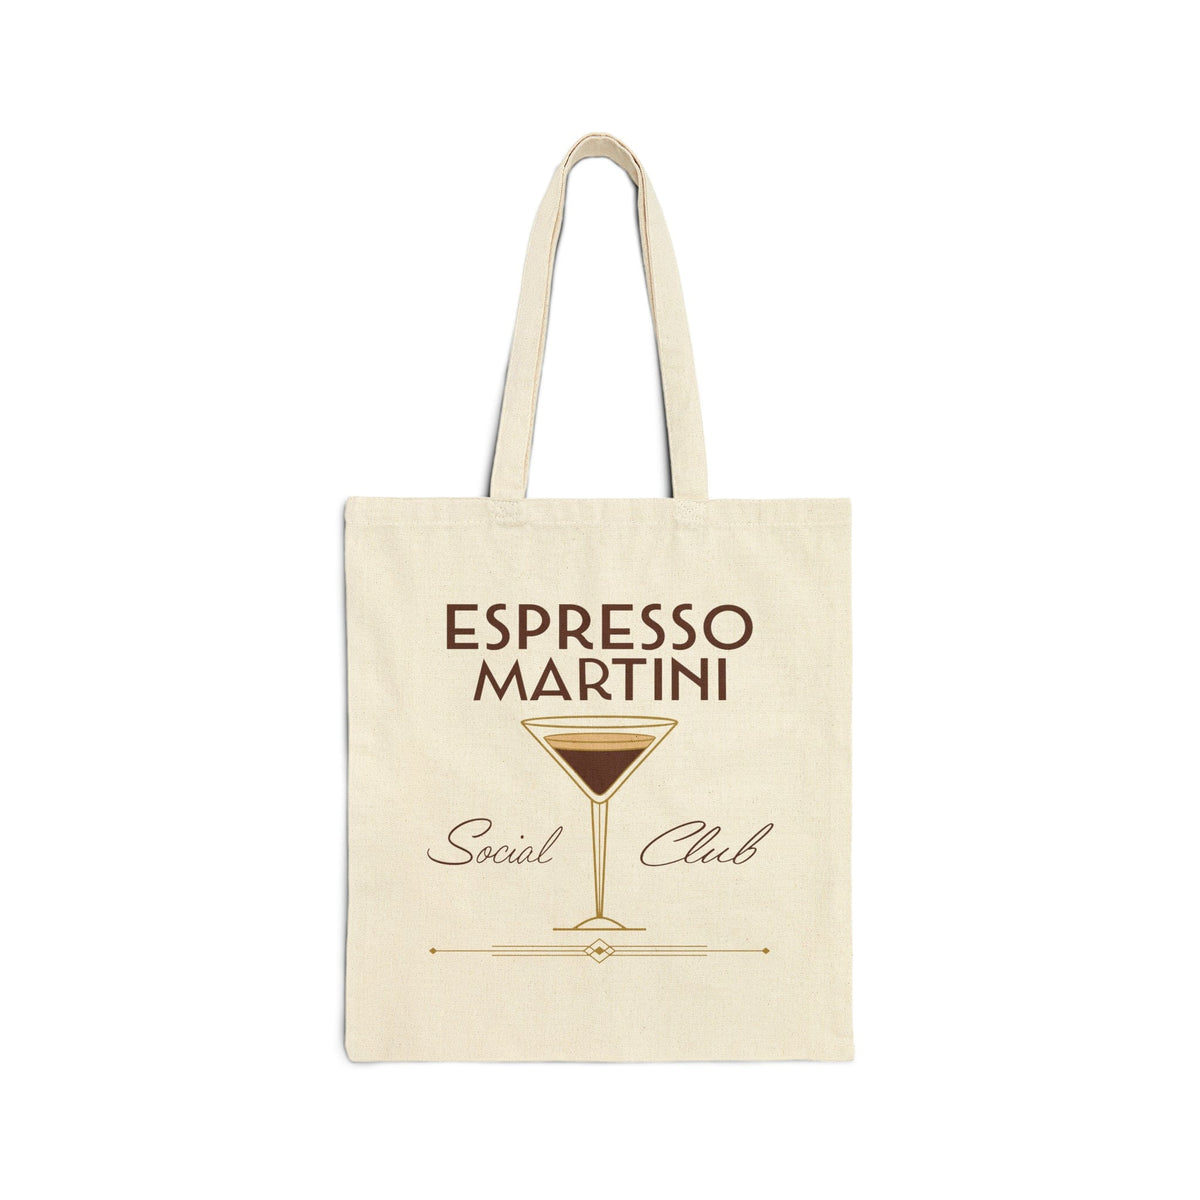 Espresso Social Club Canvas Tote | Girls Trip | Reusable Bags | Ladies Night | Gift Bag Bags TheFringeCultureCollective